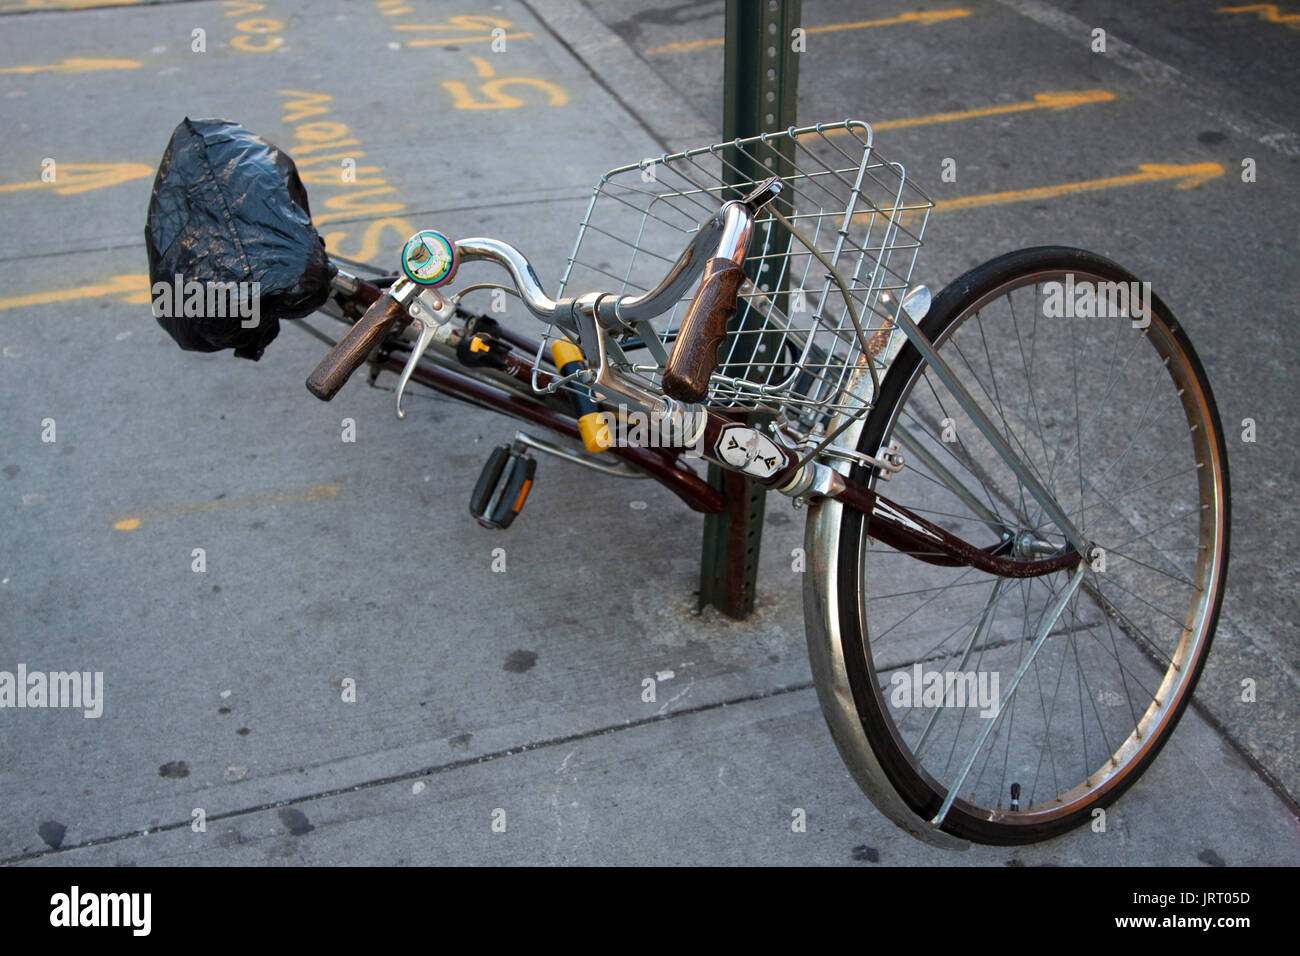 Bicycle, fallen down while attached to lamp post in Manhattan, NY. Stock Photo